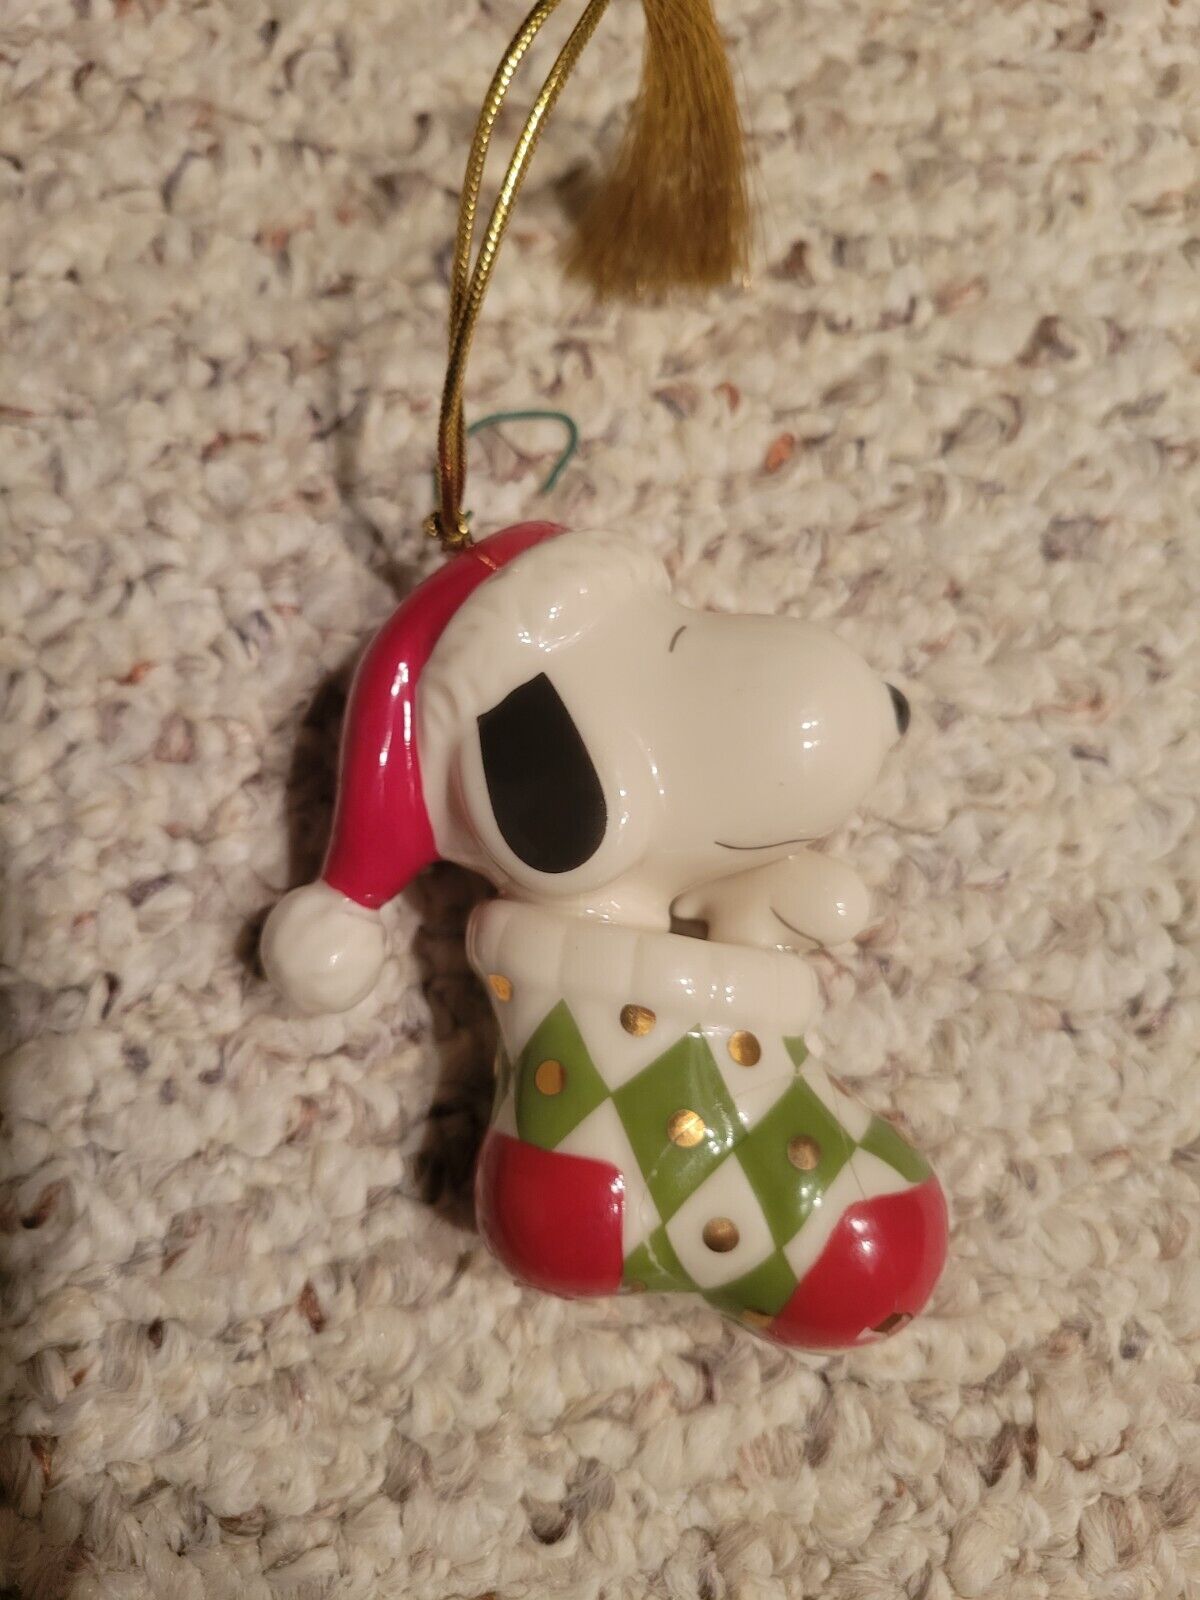 Lenox Peanuts Snoopy in Stocking Christmas Ornament With Woodstock